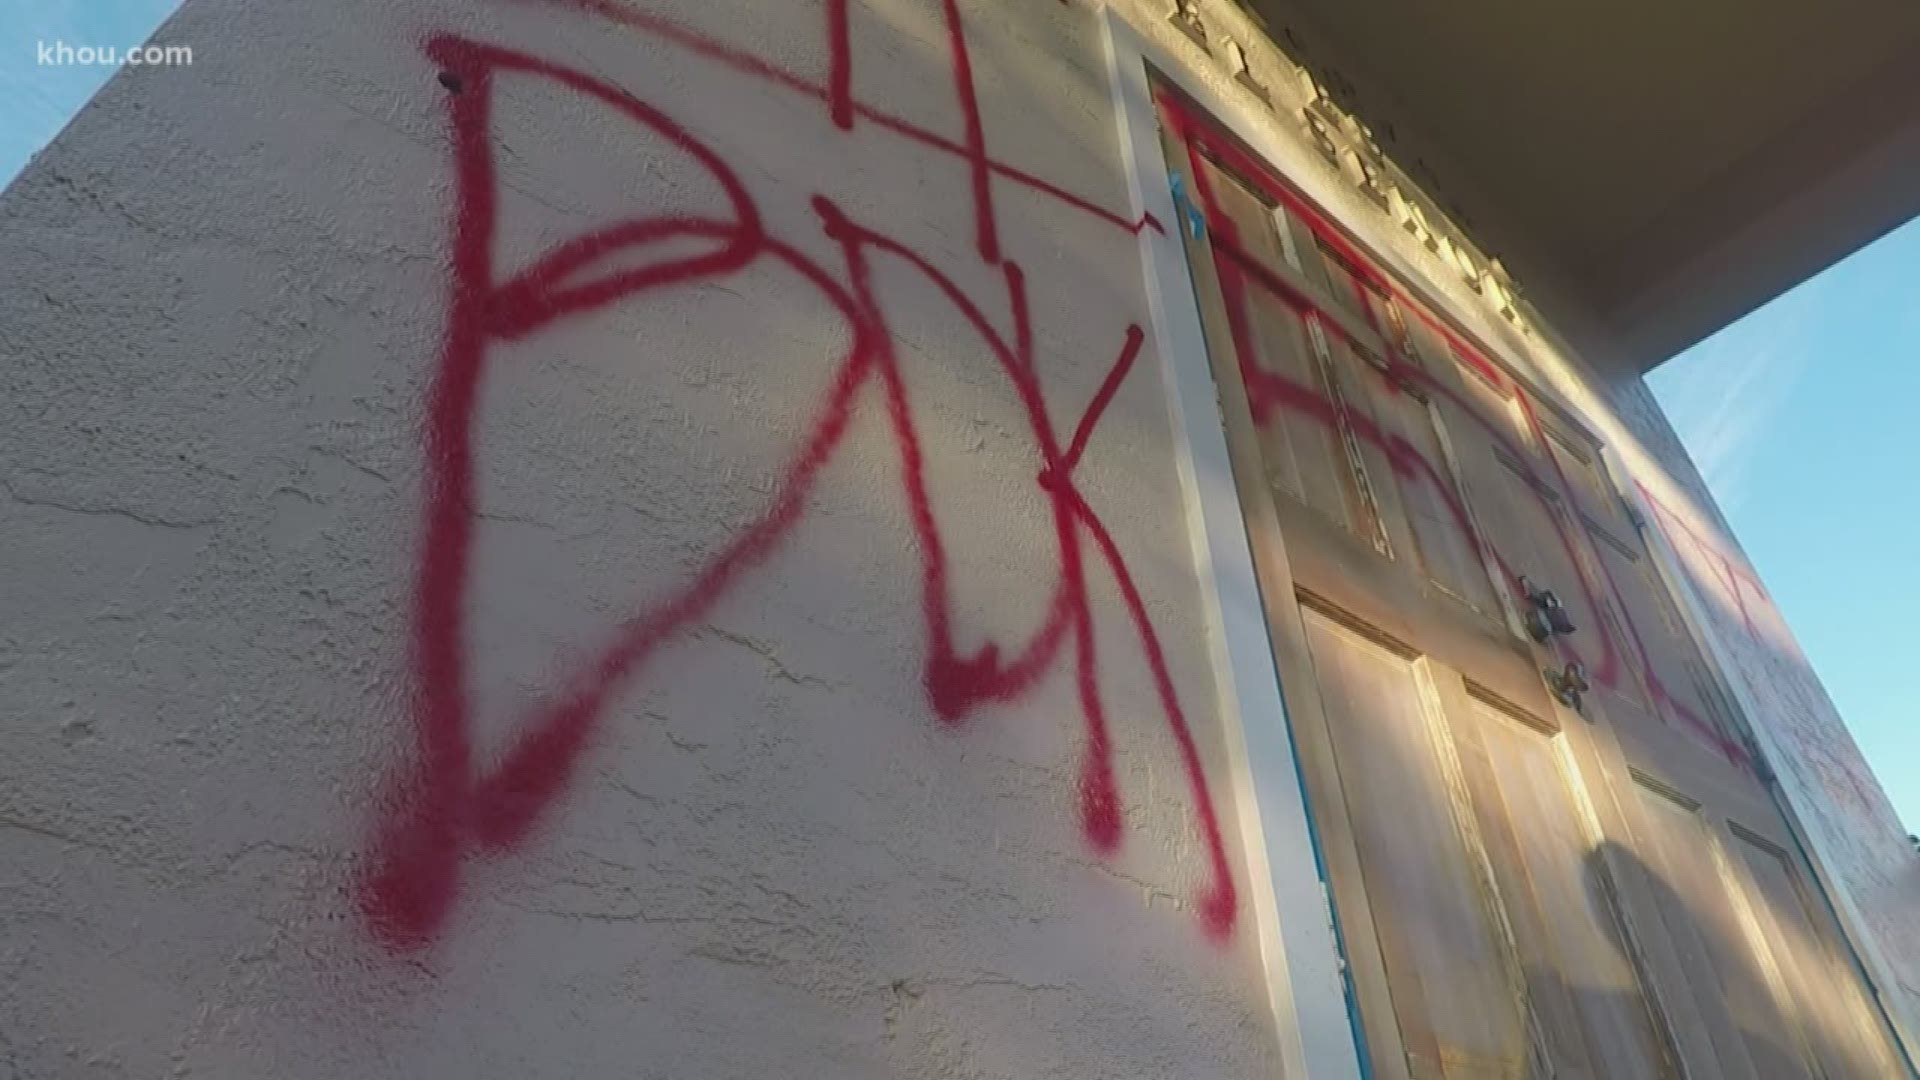 Vandals desecrated two Alvin churches with spray paint. Police are trying to find who did it.